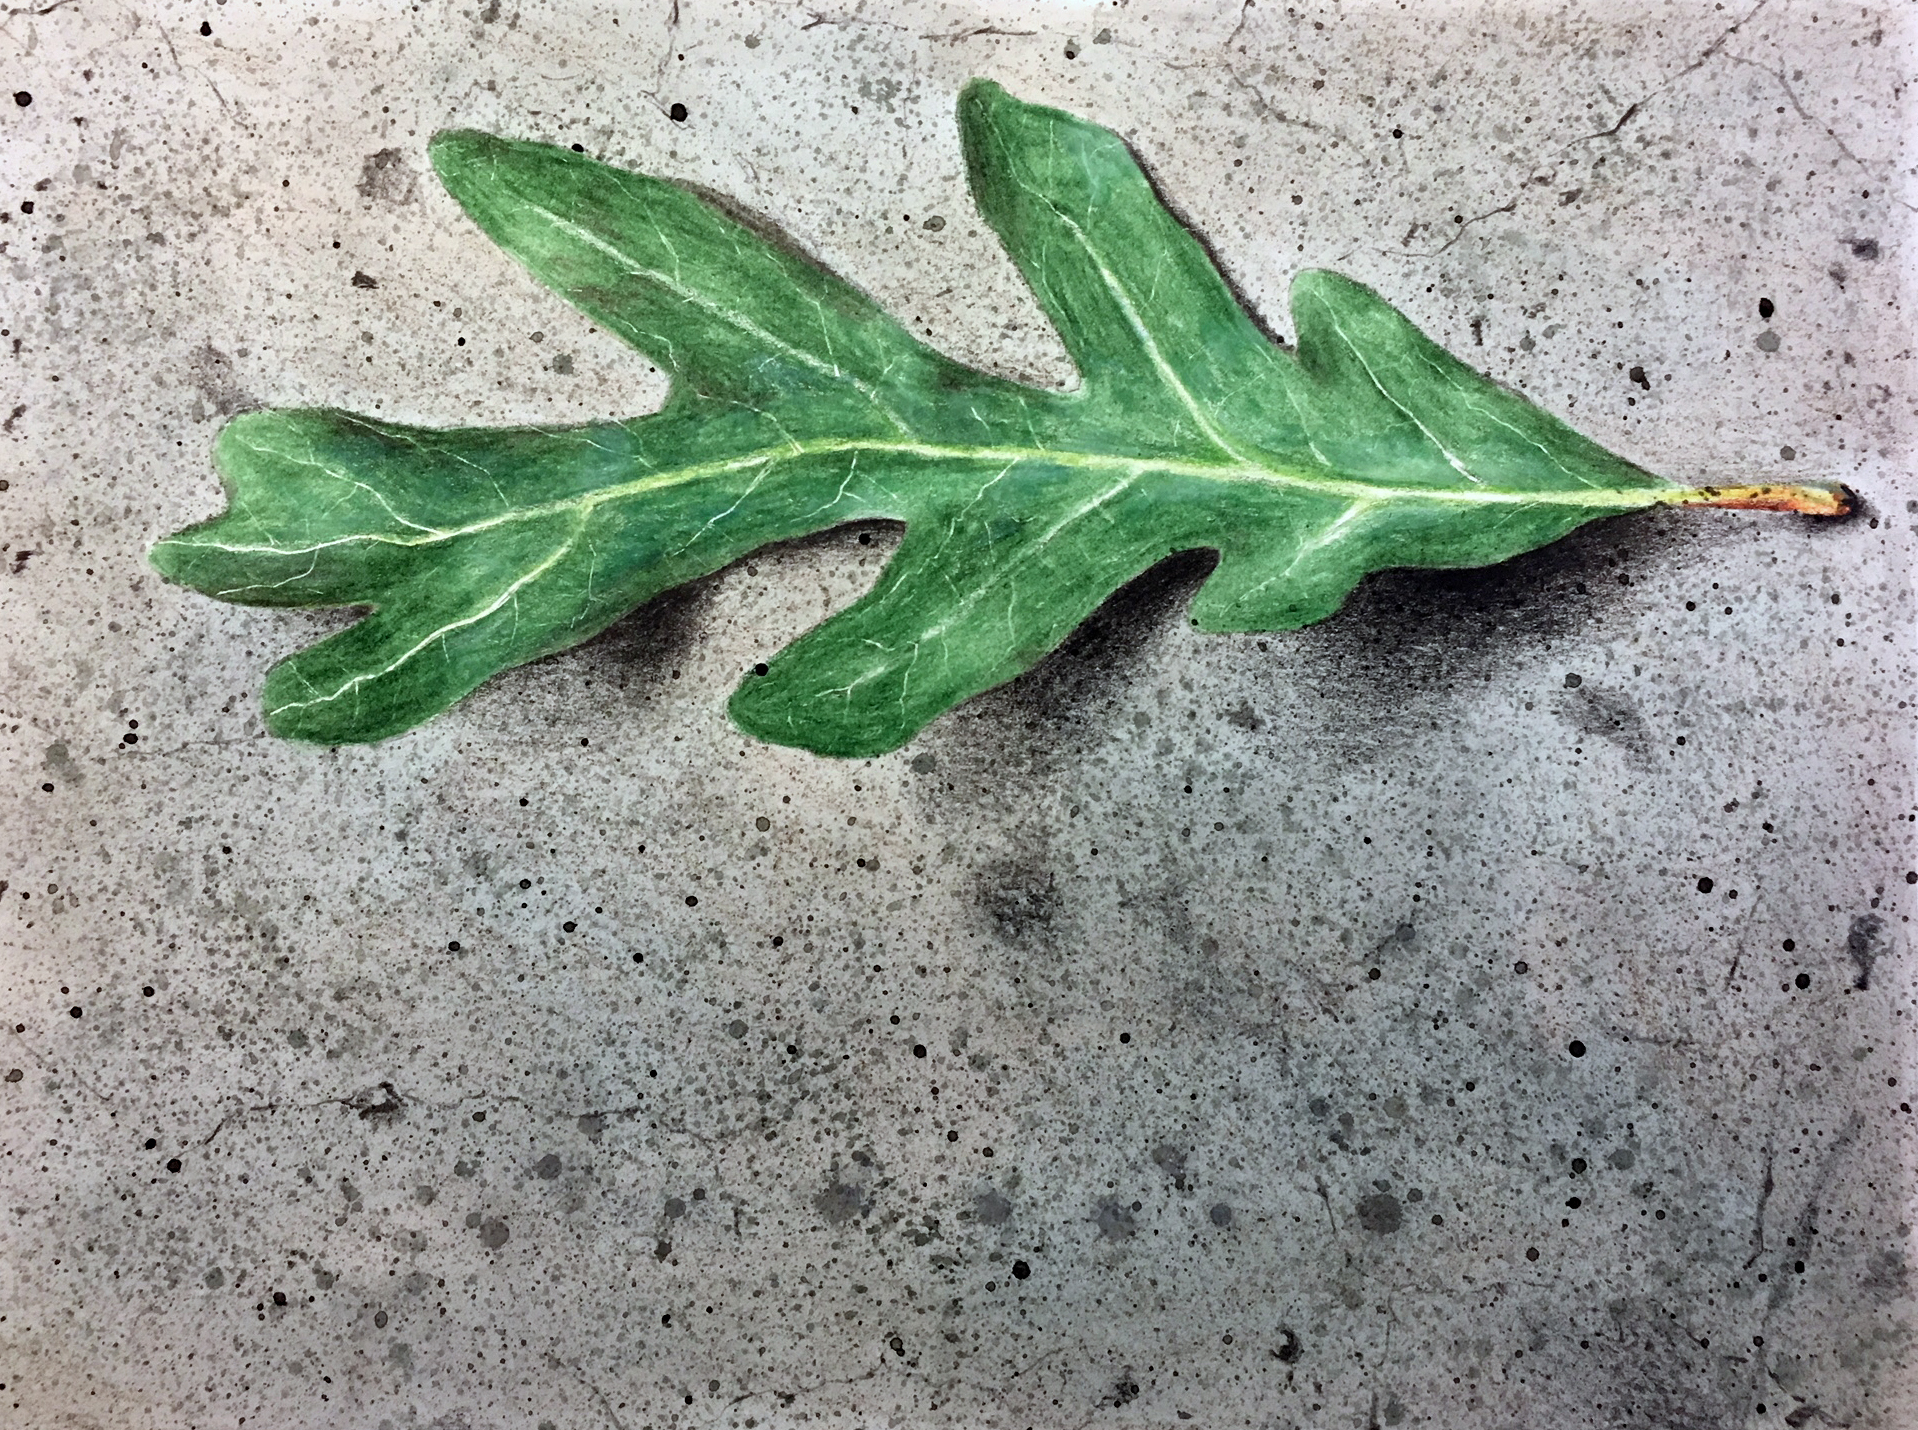 Using a colorless blender on the colored pencil applications on the leaf